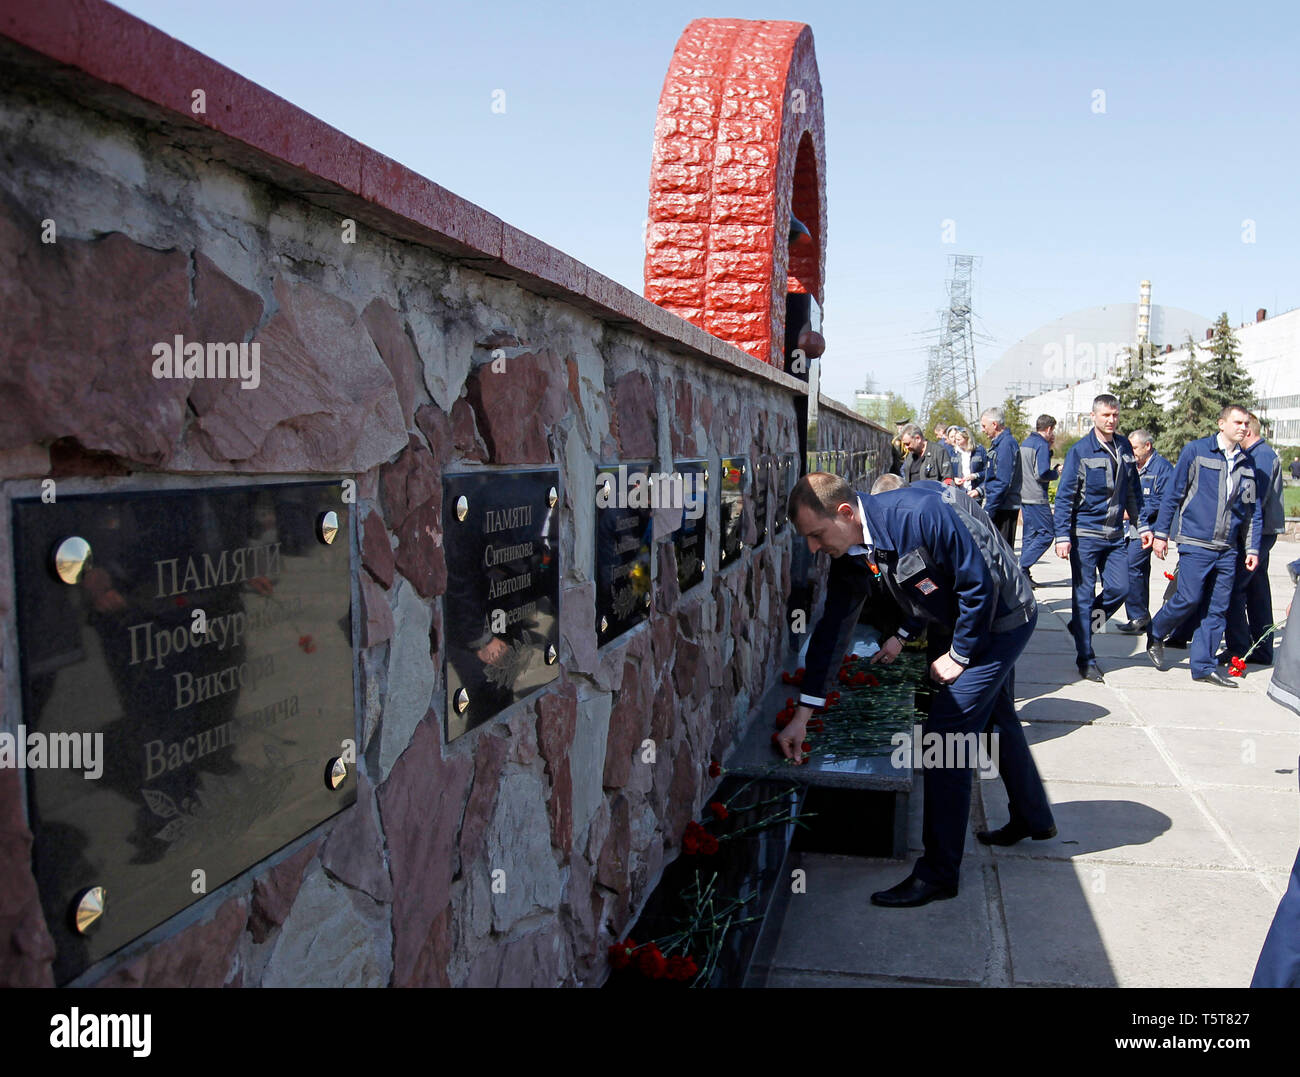 Workers are seen laying flowers to a monument of 'liquidators' during the anniversary. Ukrainians marked the 33rd anniversary of Chernobyl catastrophe. The explosion of the fourth block of the Chernobyl nuclear plant on 26 April 1986 is still regarded as the biggest accident in the history of nuclear power generation. Stock Photo